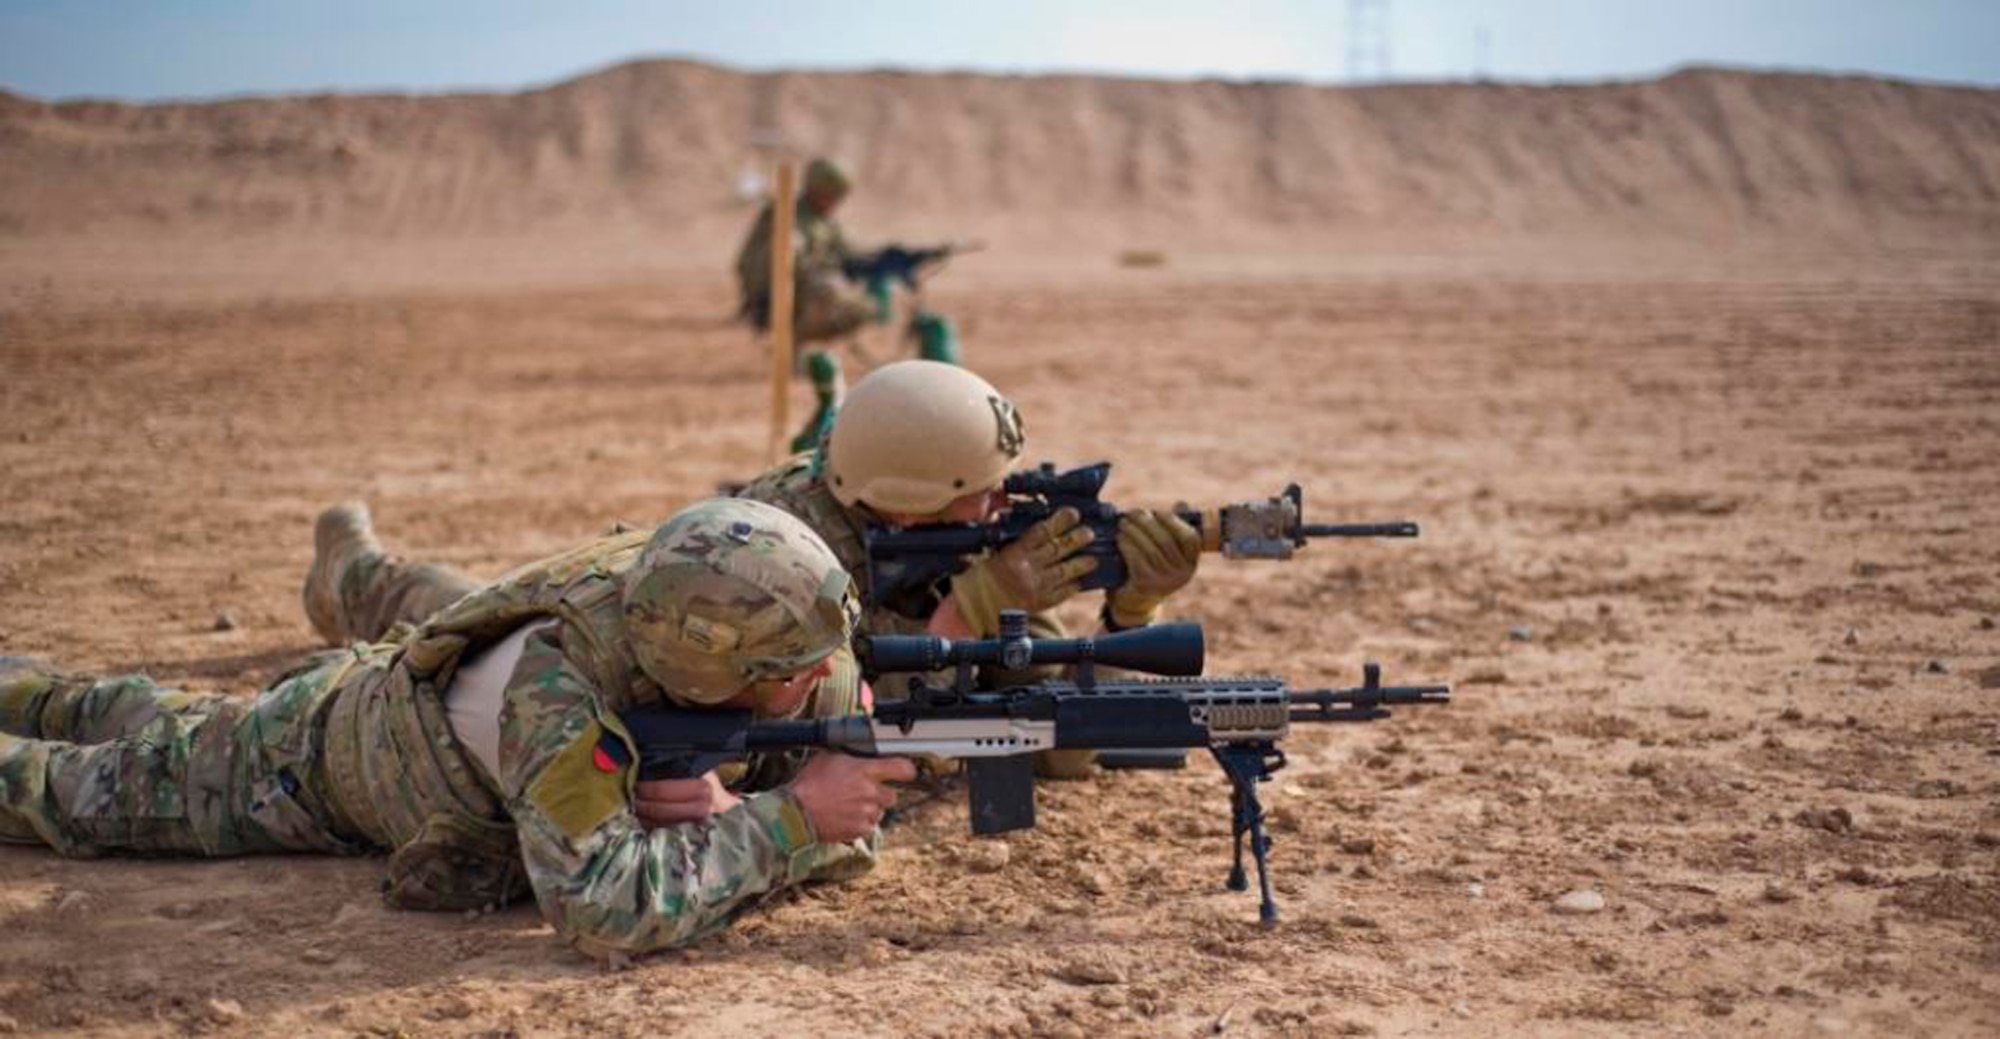 Tech. Sgt. Dustin Lambries, a 466th Operating Location Delta Explosives Ordinance Disposal team lead, fires an Mk 14 enhanced battle rifle, while Staff Sgt. Bradford Bends, 466th OL-Delta, EOD, spots their target at a firing range at Camp Leatherneck, Afghanistan, Dec. 28, 2012. After identifying the need for a more capable rifle while outside the wire, Delta upgraded its dismount teams with the EBR, enhancing their ability to respond to long-distance hostile fire. (U.S. Air Force photo/Tech. Sgt. Swift Moon)